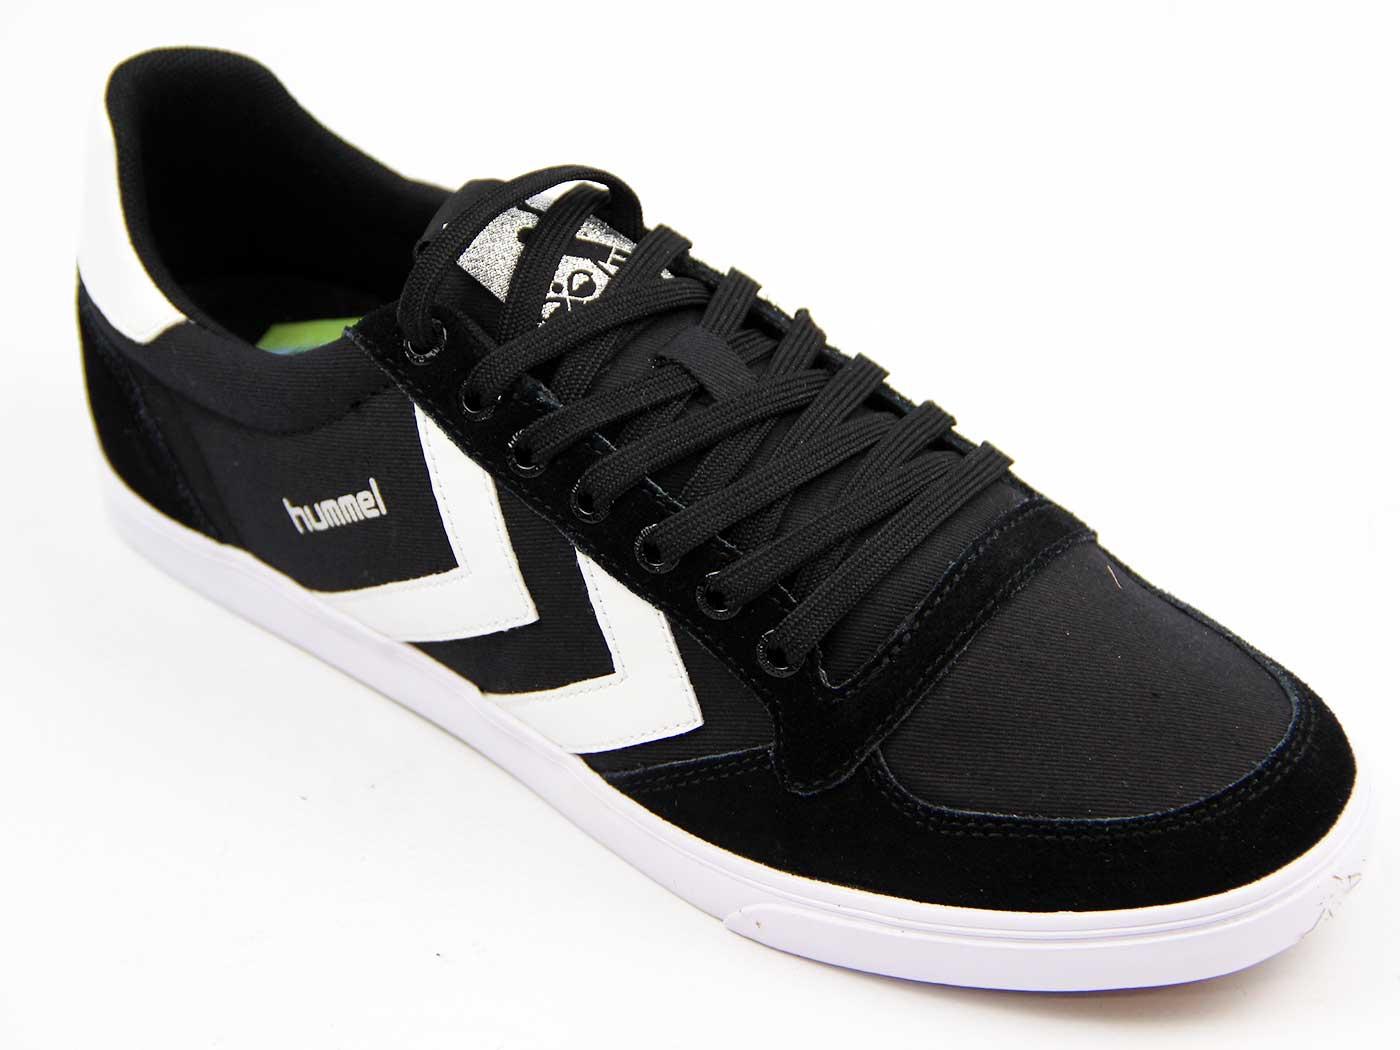 HUMMEL Slimmer Stadil Low Canvas Retro Trainers BW